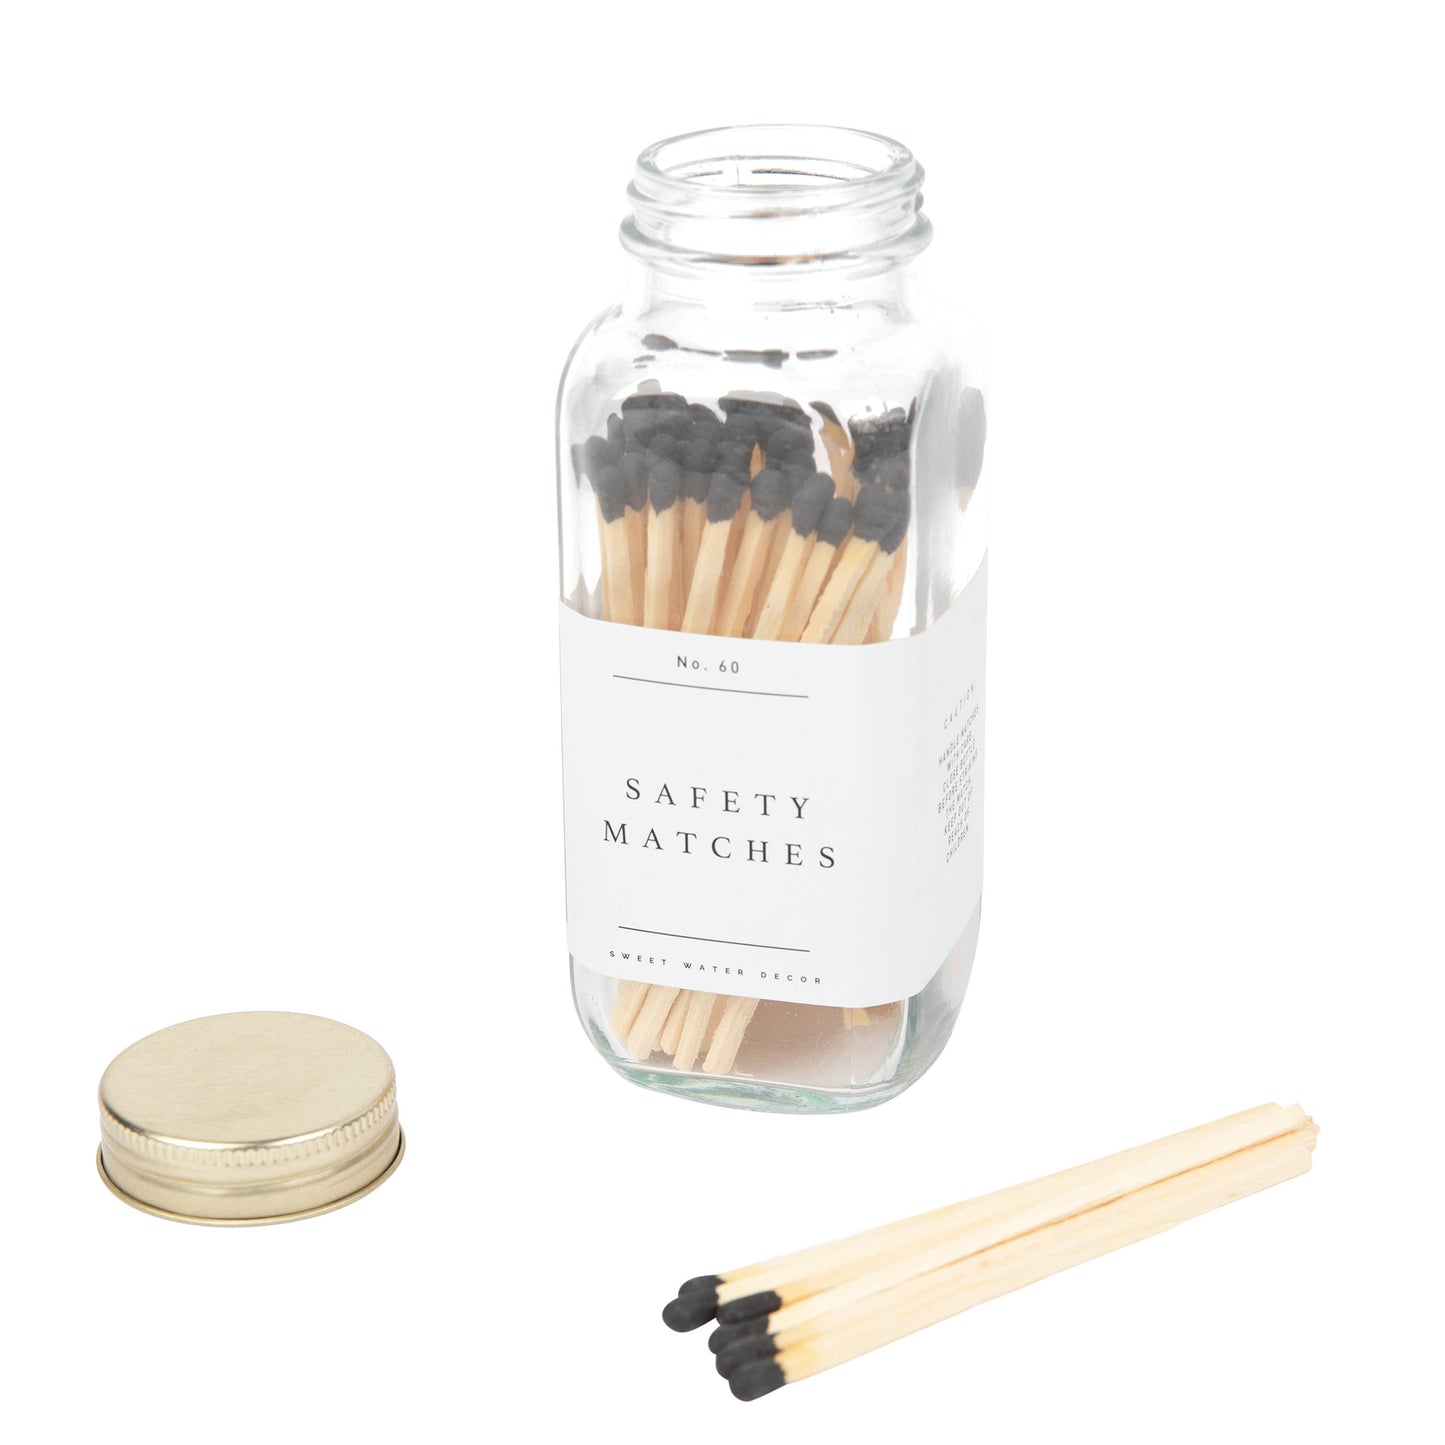 Safety Matches, Black Tip - Home Decor & Gifts